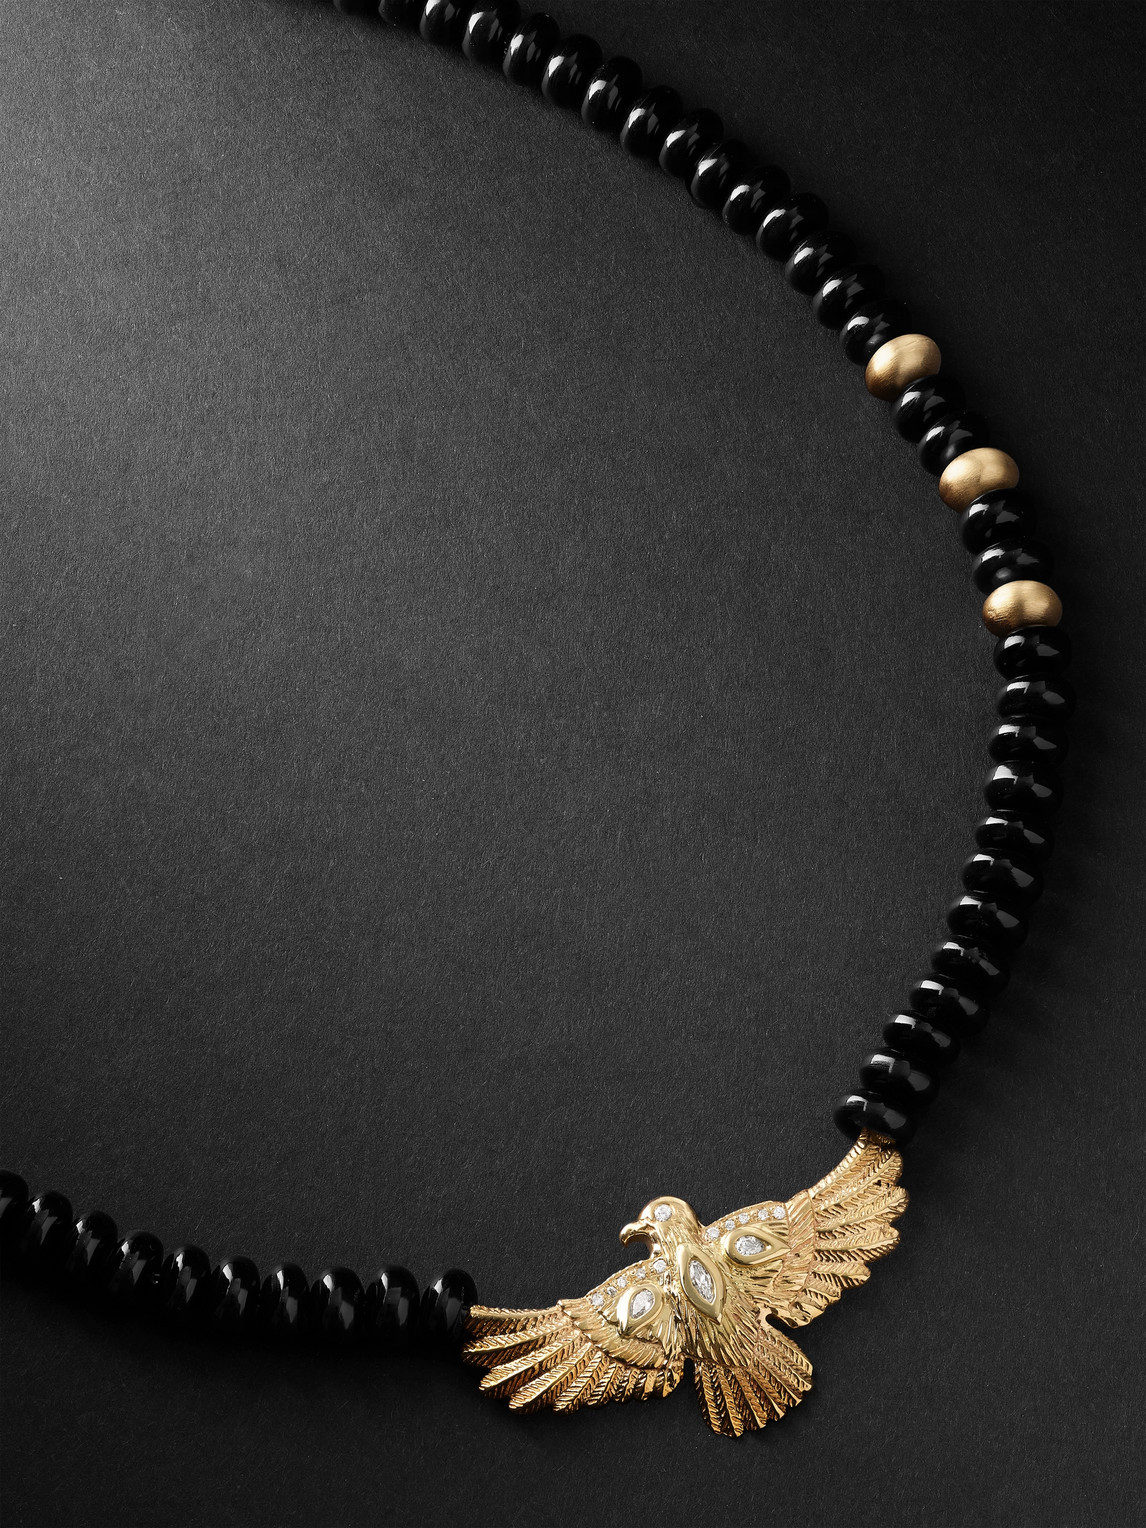 Gold, Onyx and Diamond Beaded Necklace